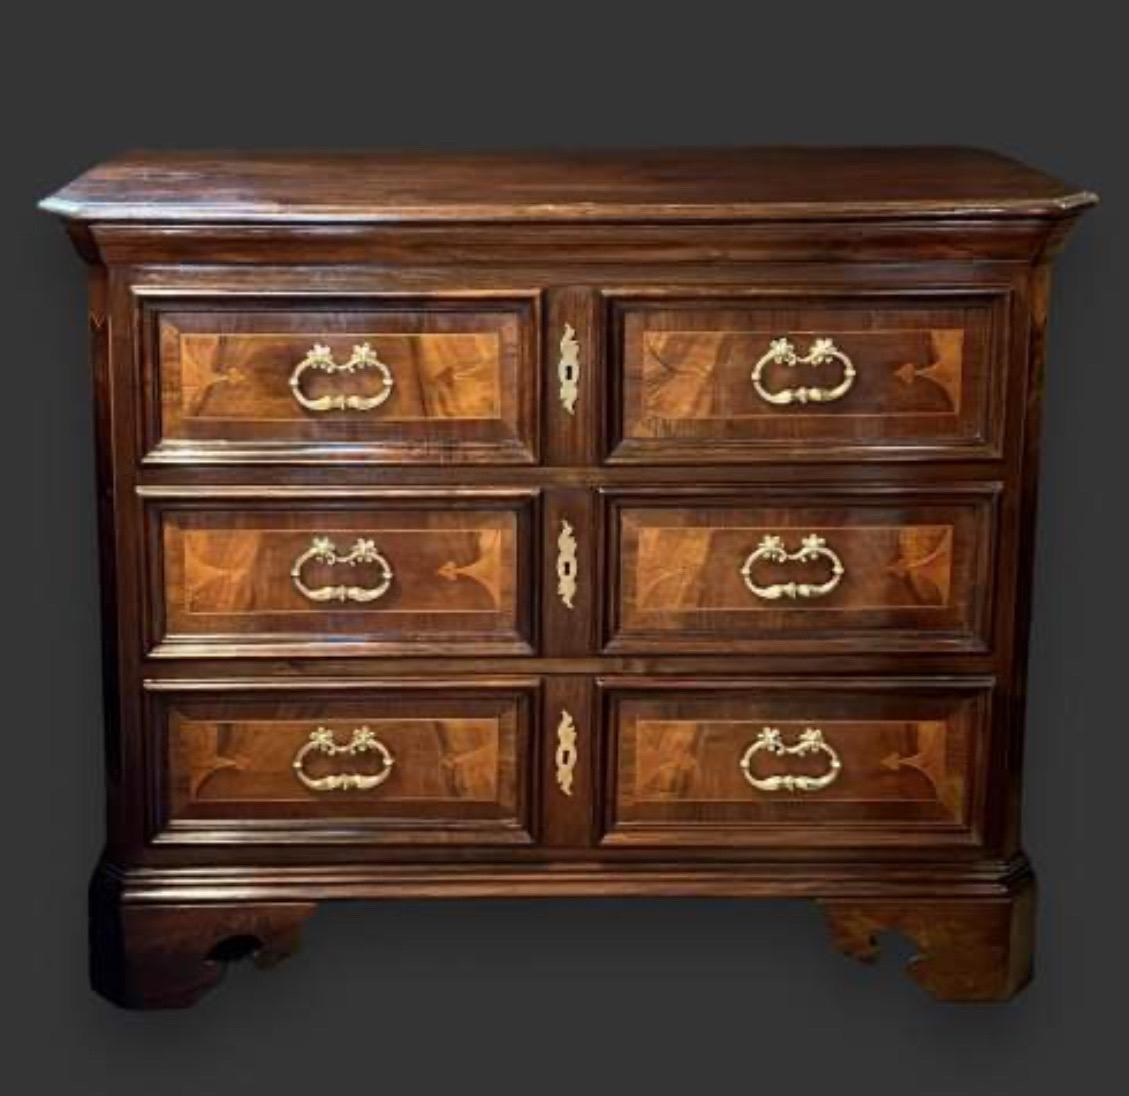  A Large 18th Century Northern Italian Chest of Drawers  For Sale 1